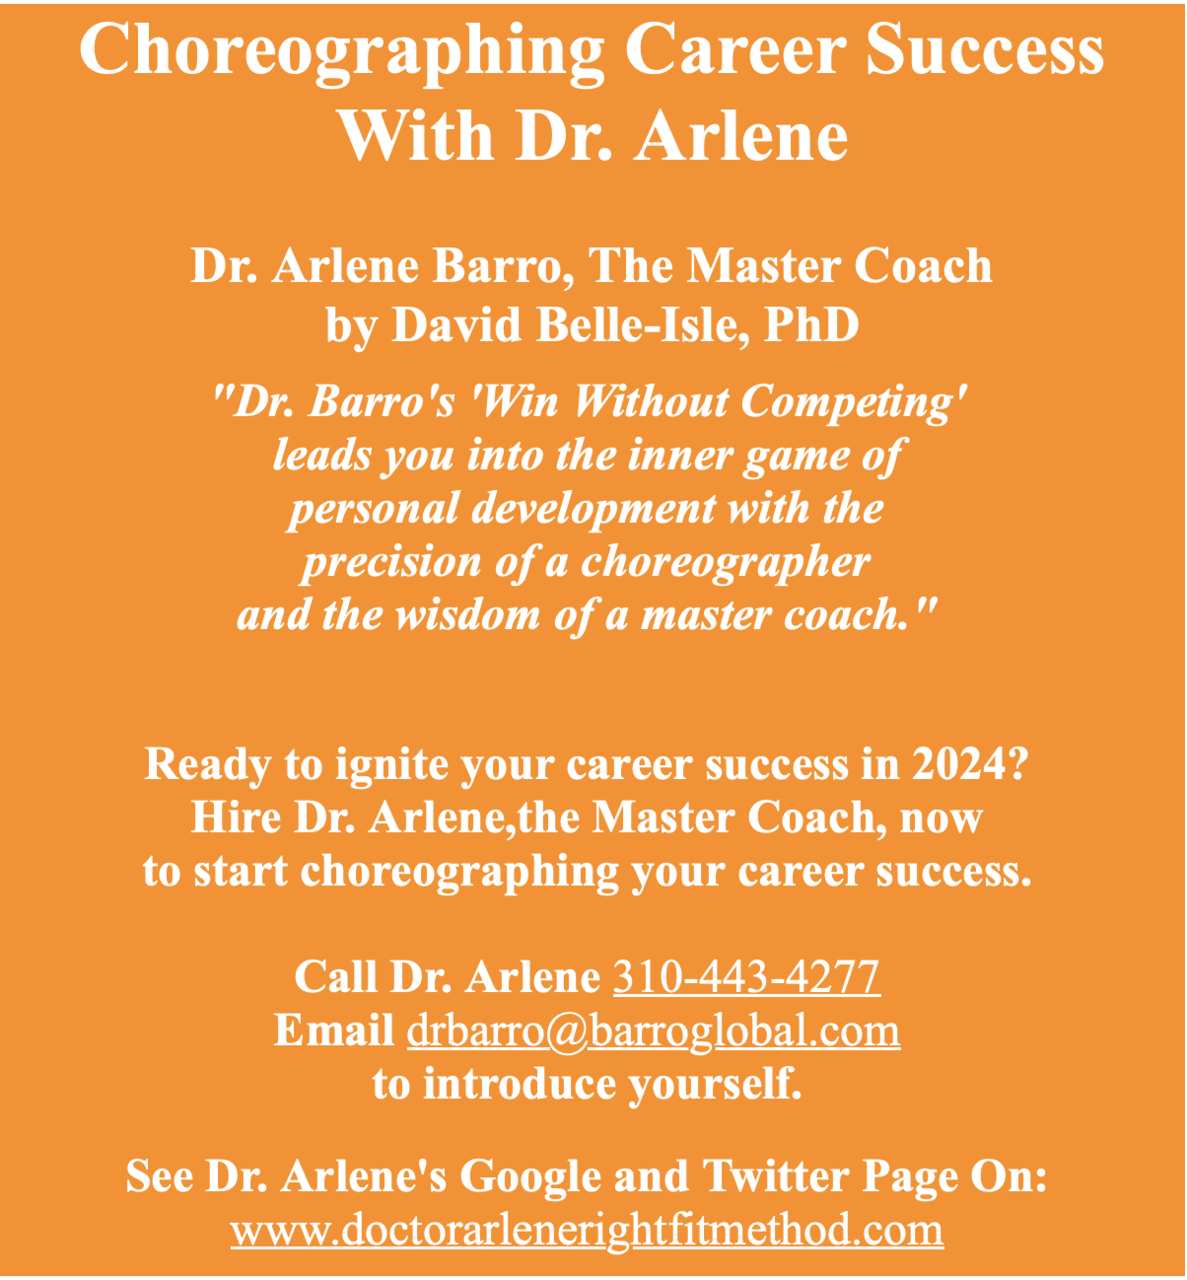 Brand to Win with Dr. Arlene in 2021!  Call Dr. Arlene 310-443-4277 now.